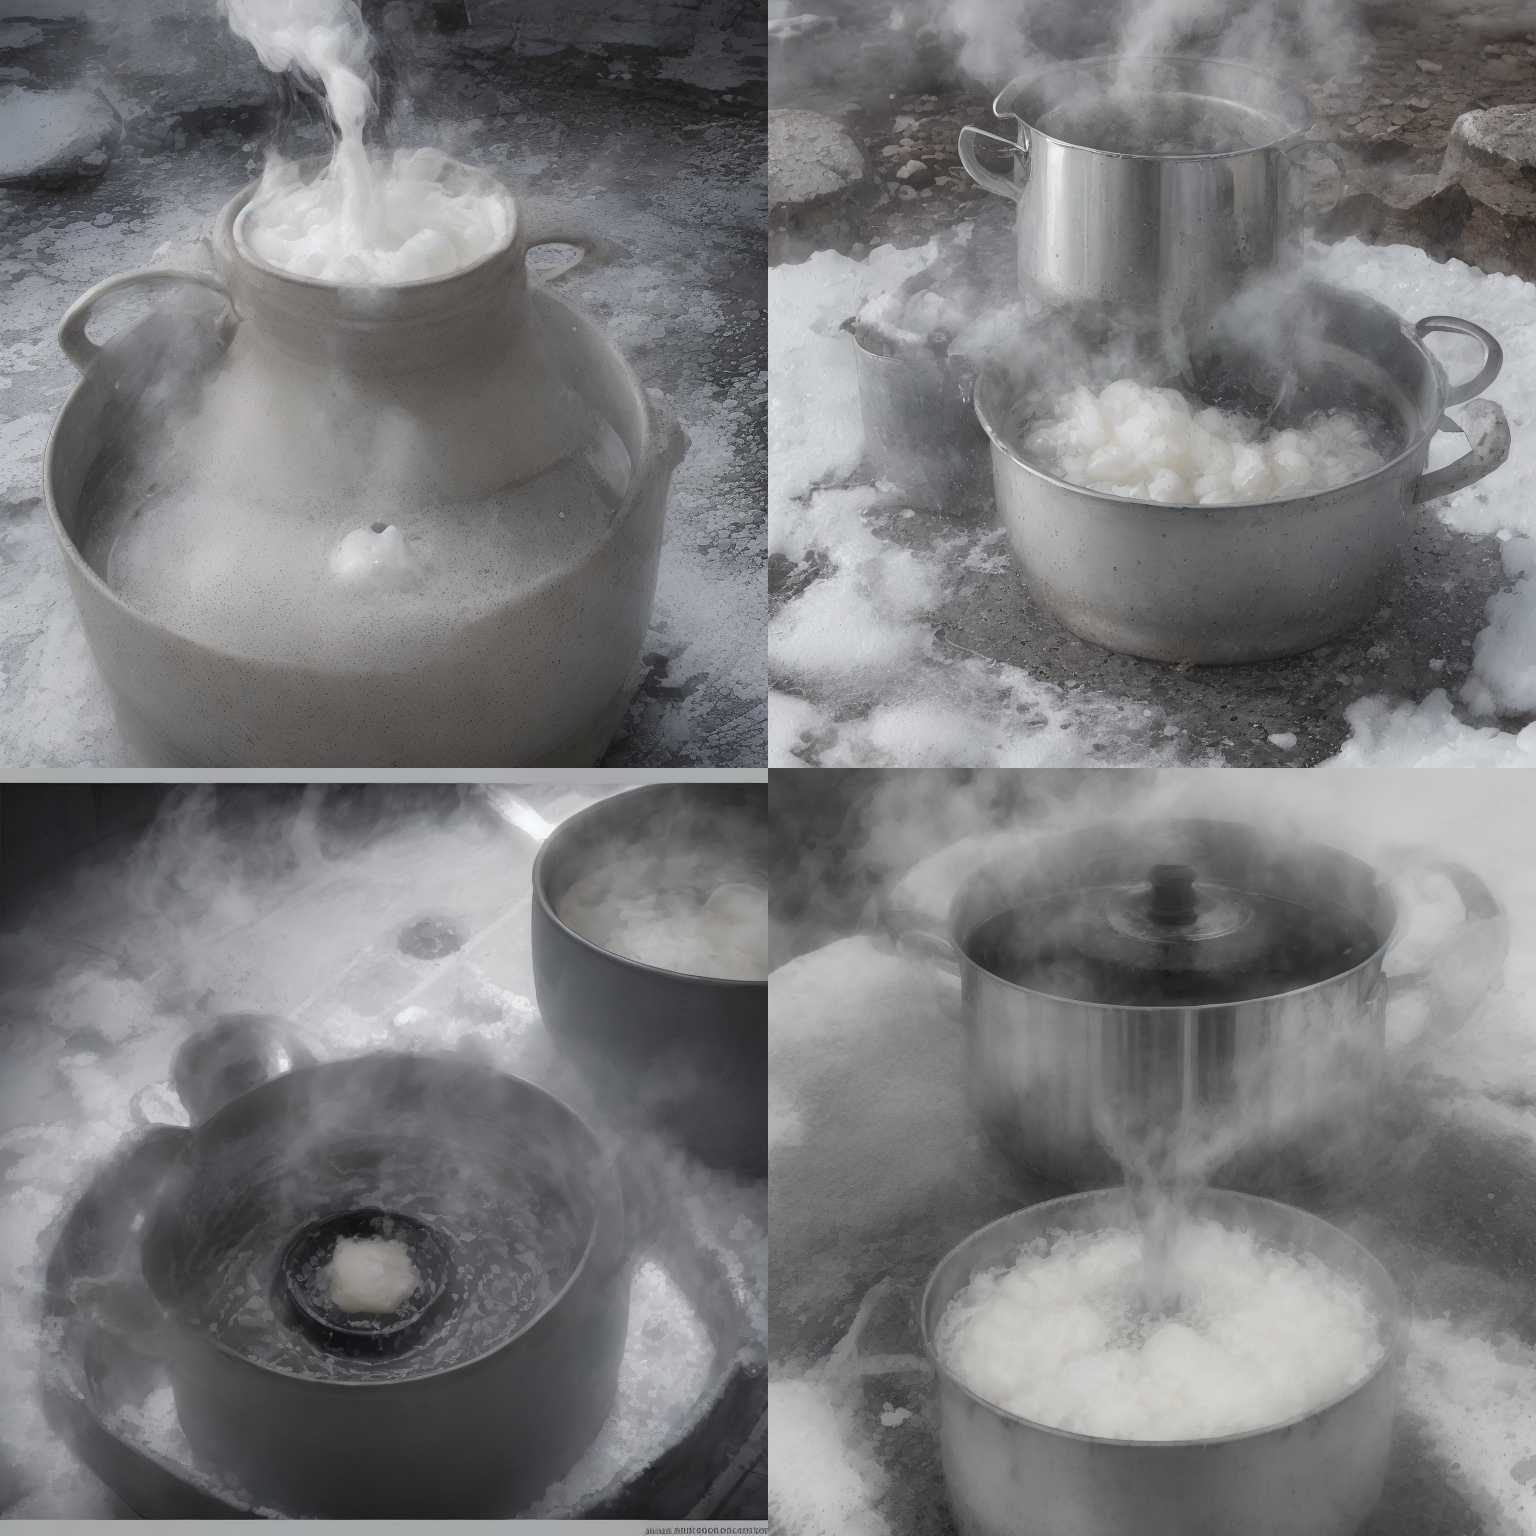 A pot of boiling water on a cold day